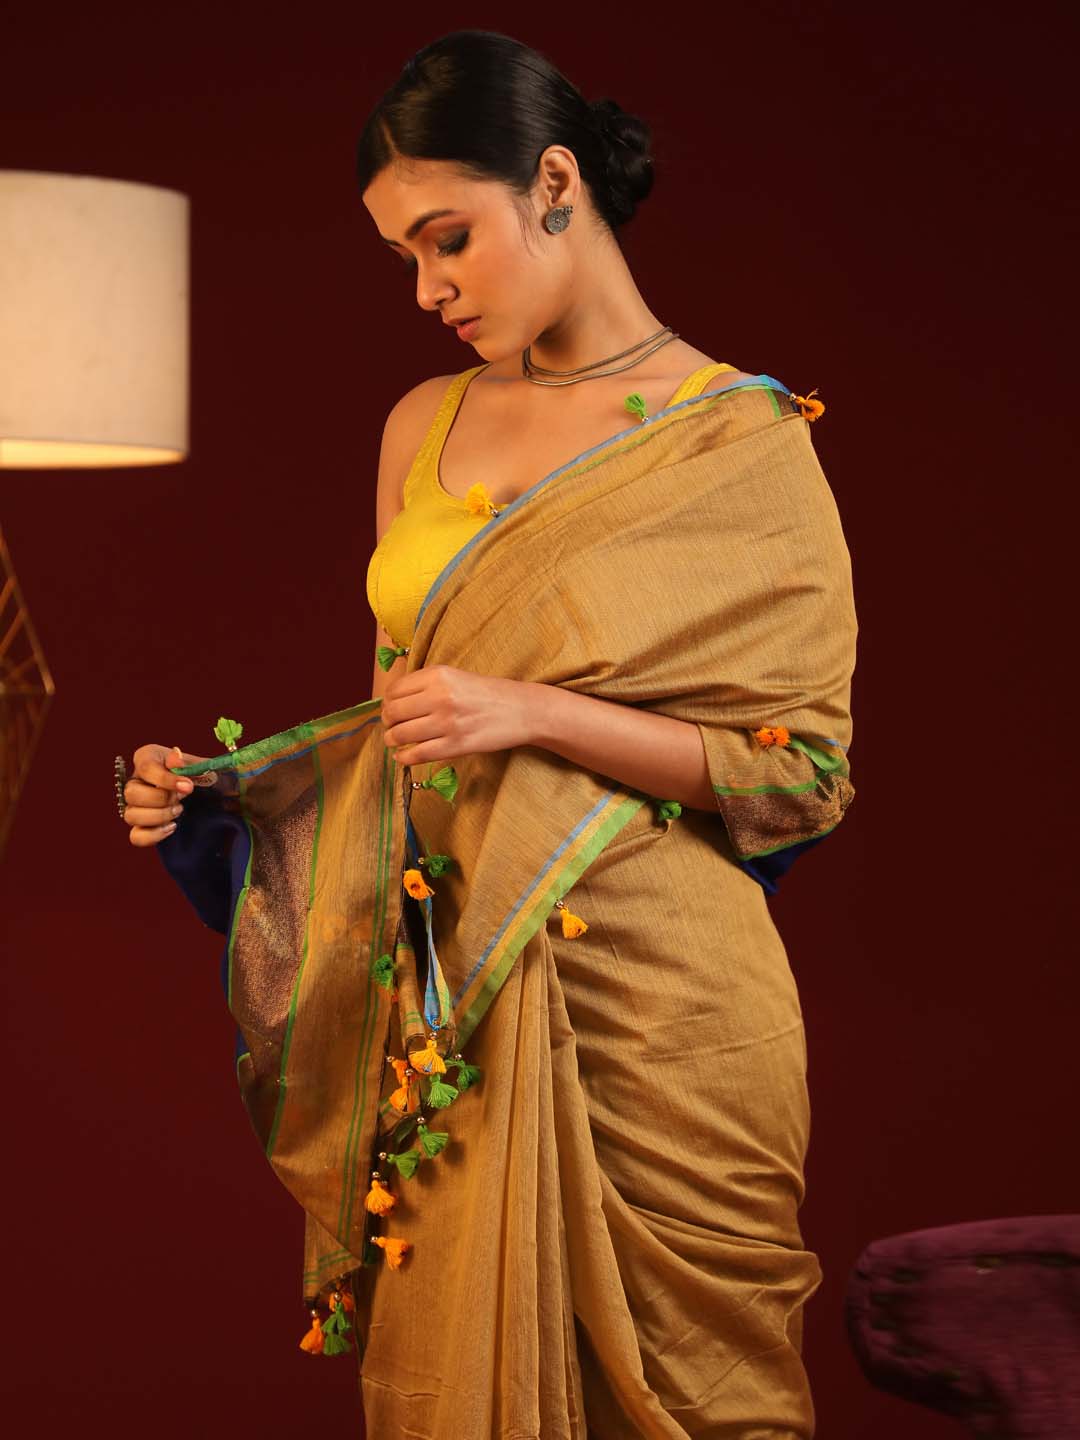 Indethnic Olive and Black Solid Colour Blocked Saree with Tassles - View 2